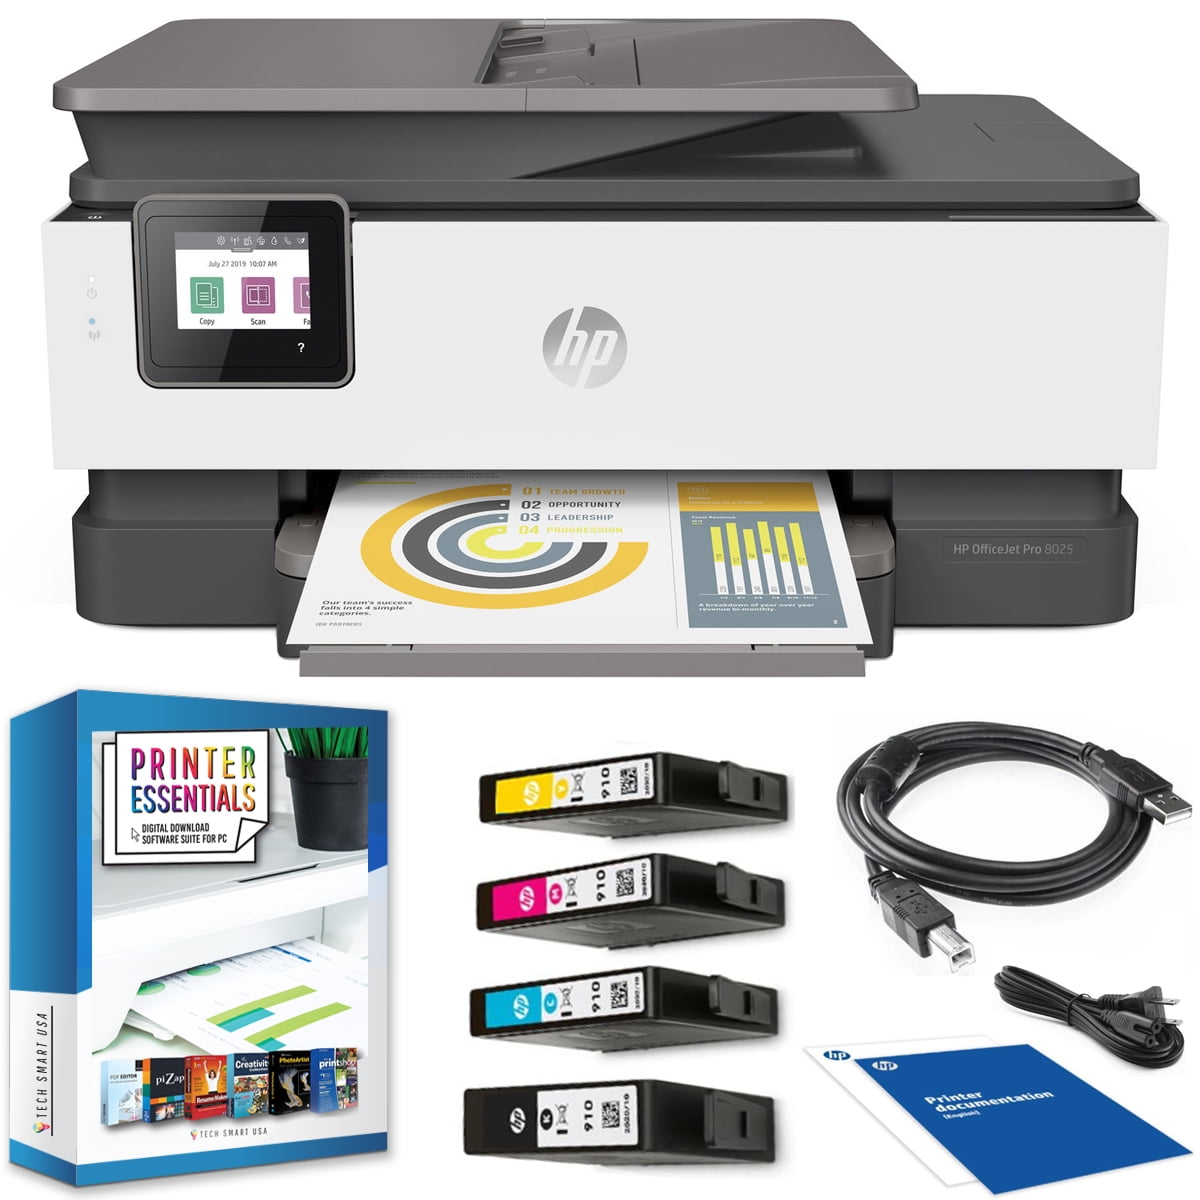 HP OfficeJet Pro 8025 All-in-One Wireless Printer with Smart Tasks for Home Office Productivity Renewed 1KR57A 